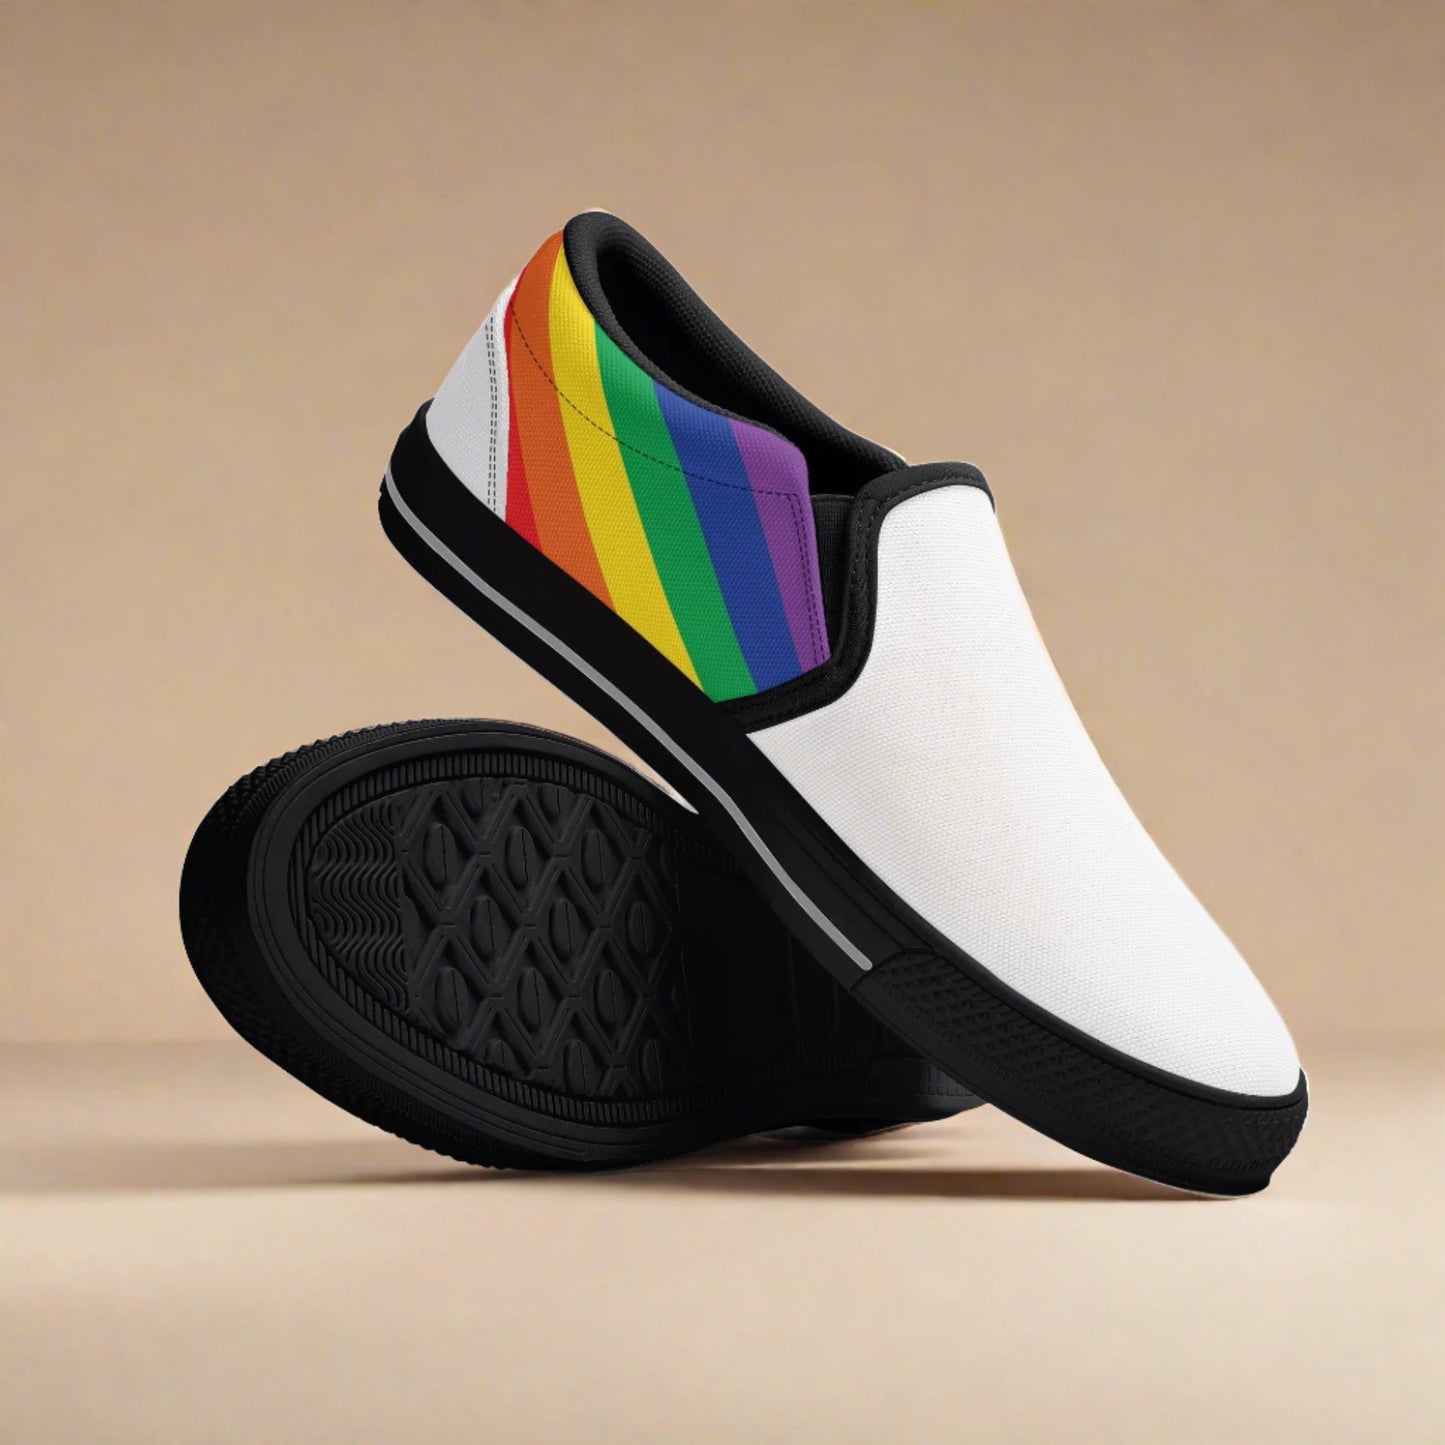 Rainbow LGBT Not A Phase Slip-On Mens Sneakers - Rose Gold Co. Shop